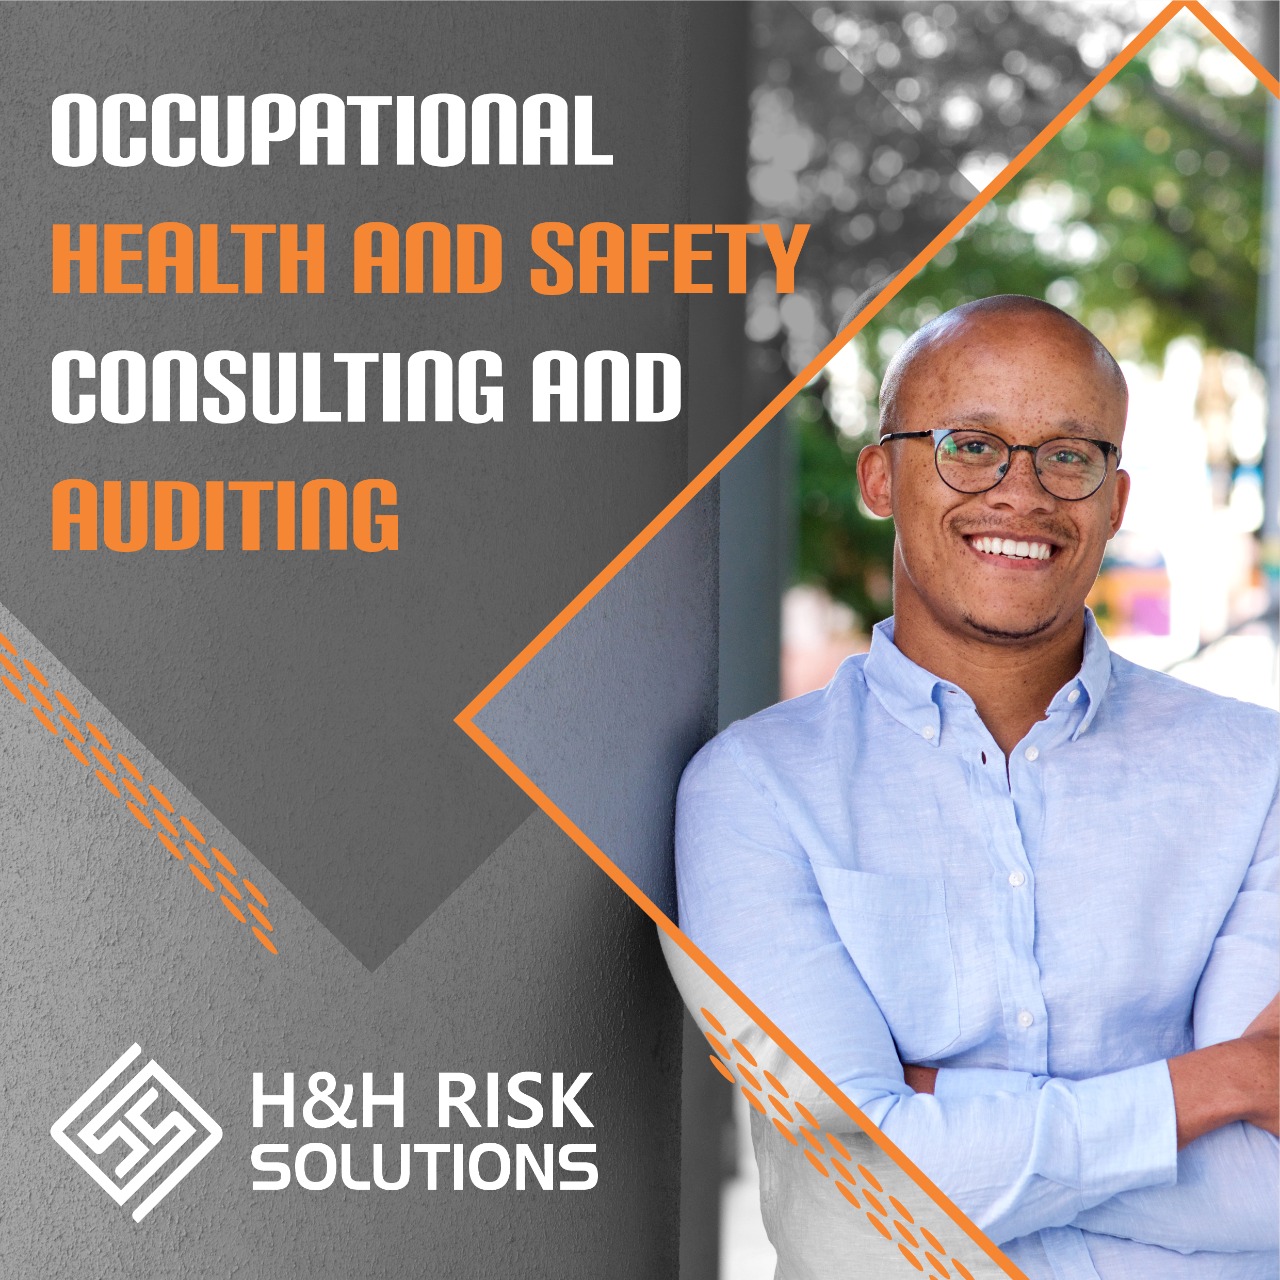 H & H Risk Solutions